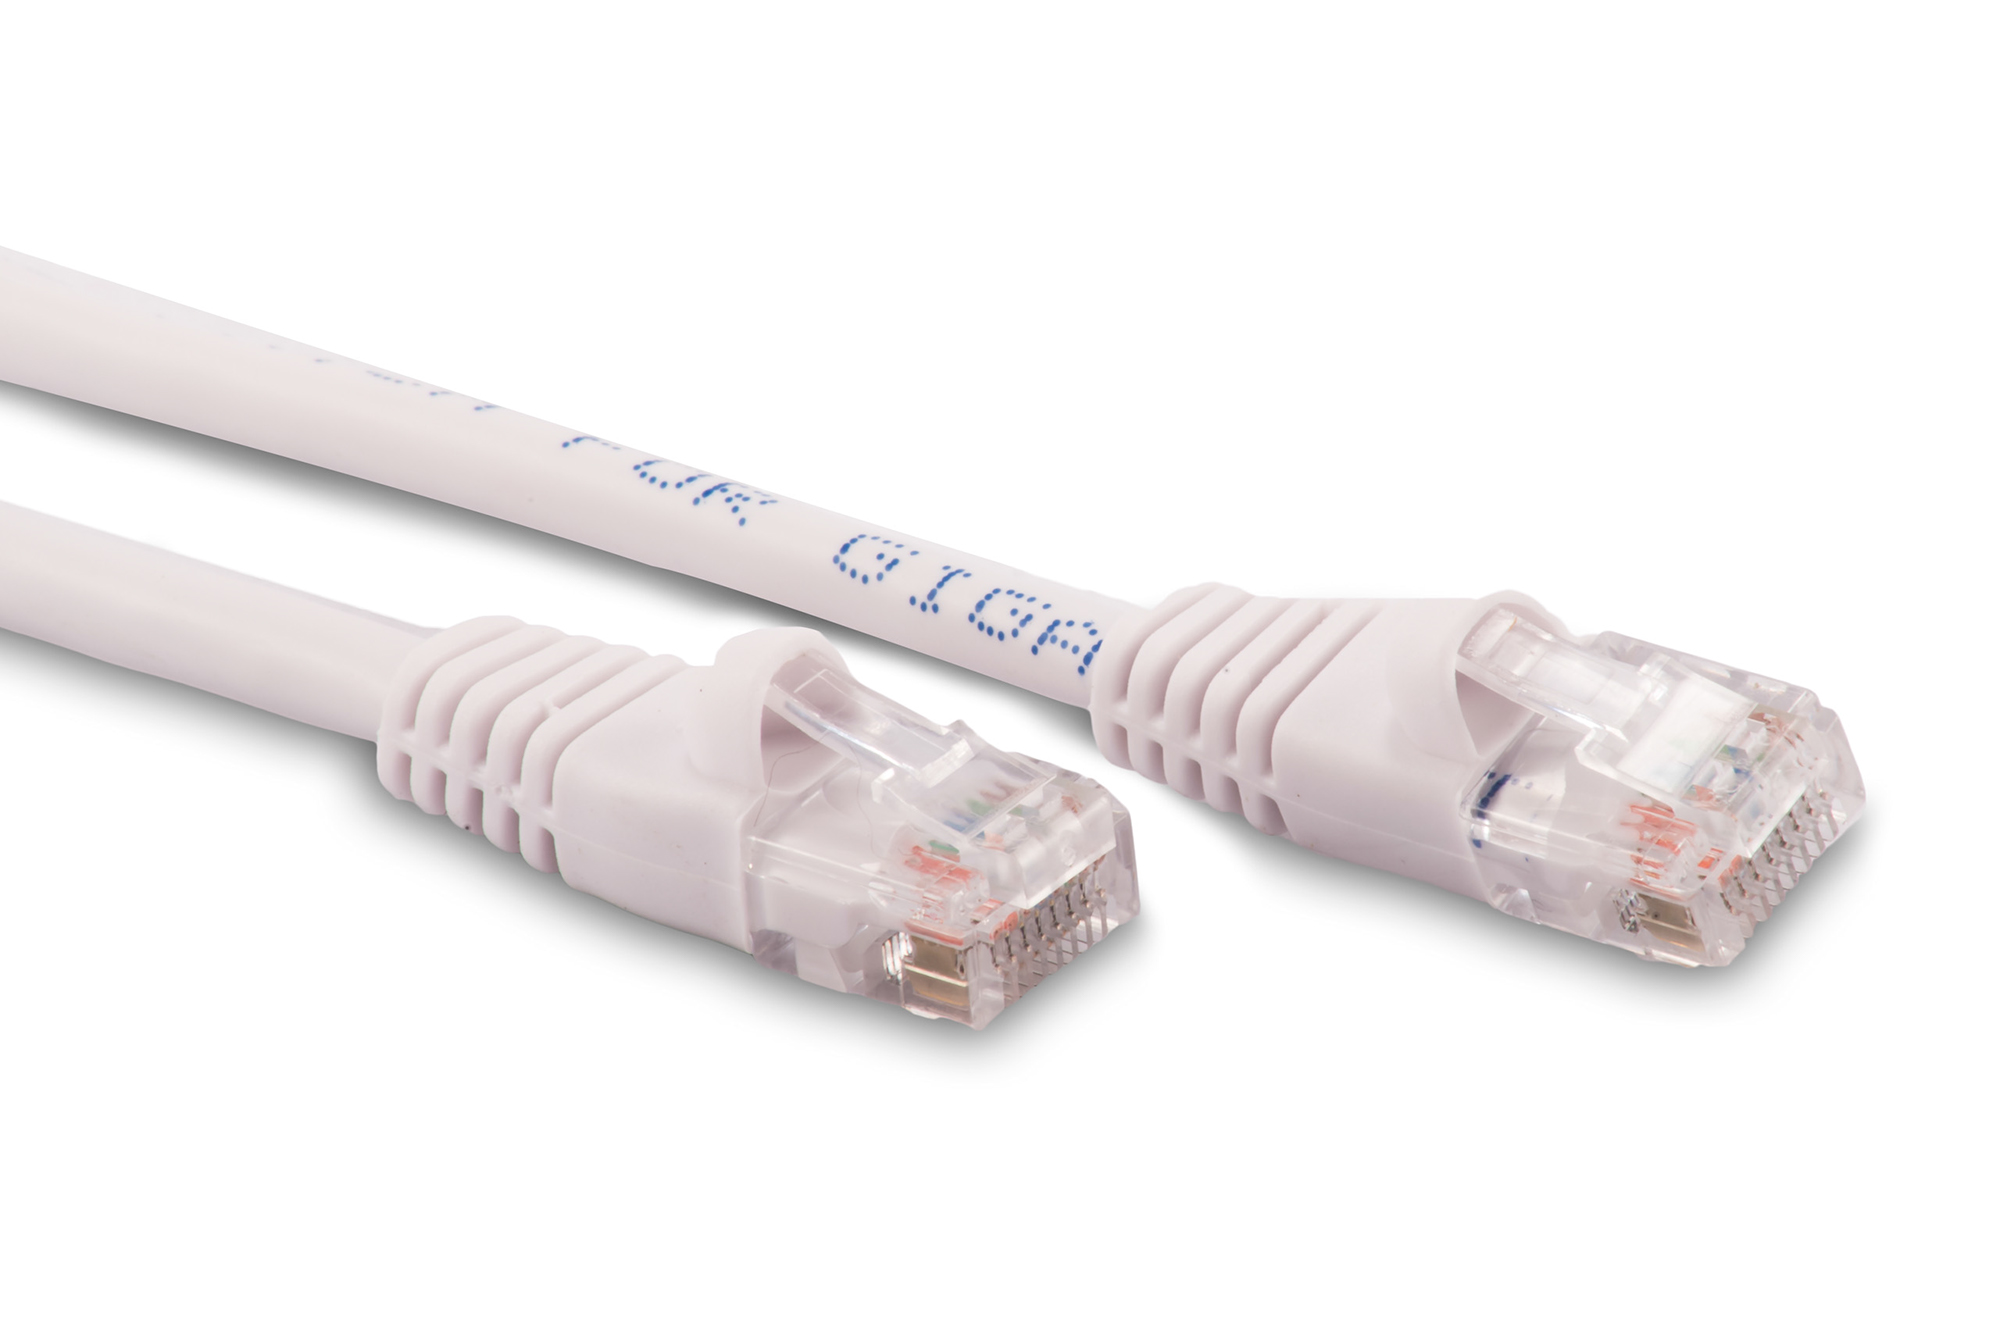 75ft Cat6 Ethernet Patch Cable - White Color - Snagless Boot